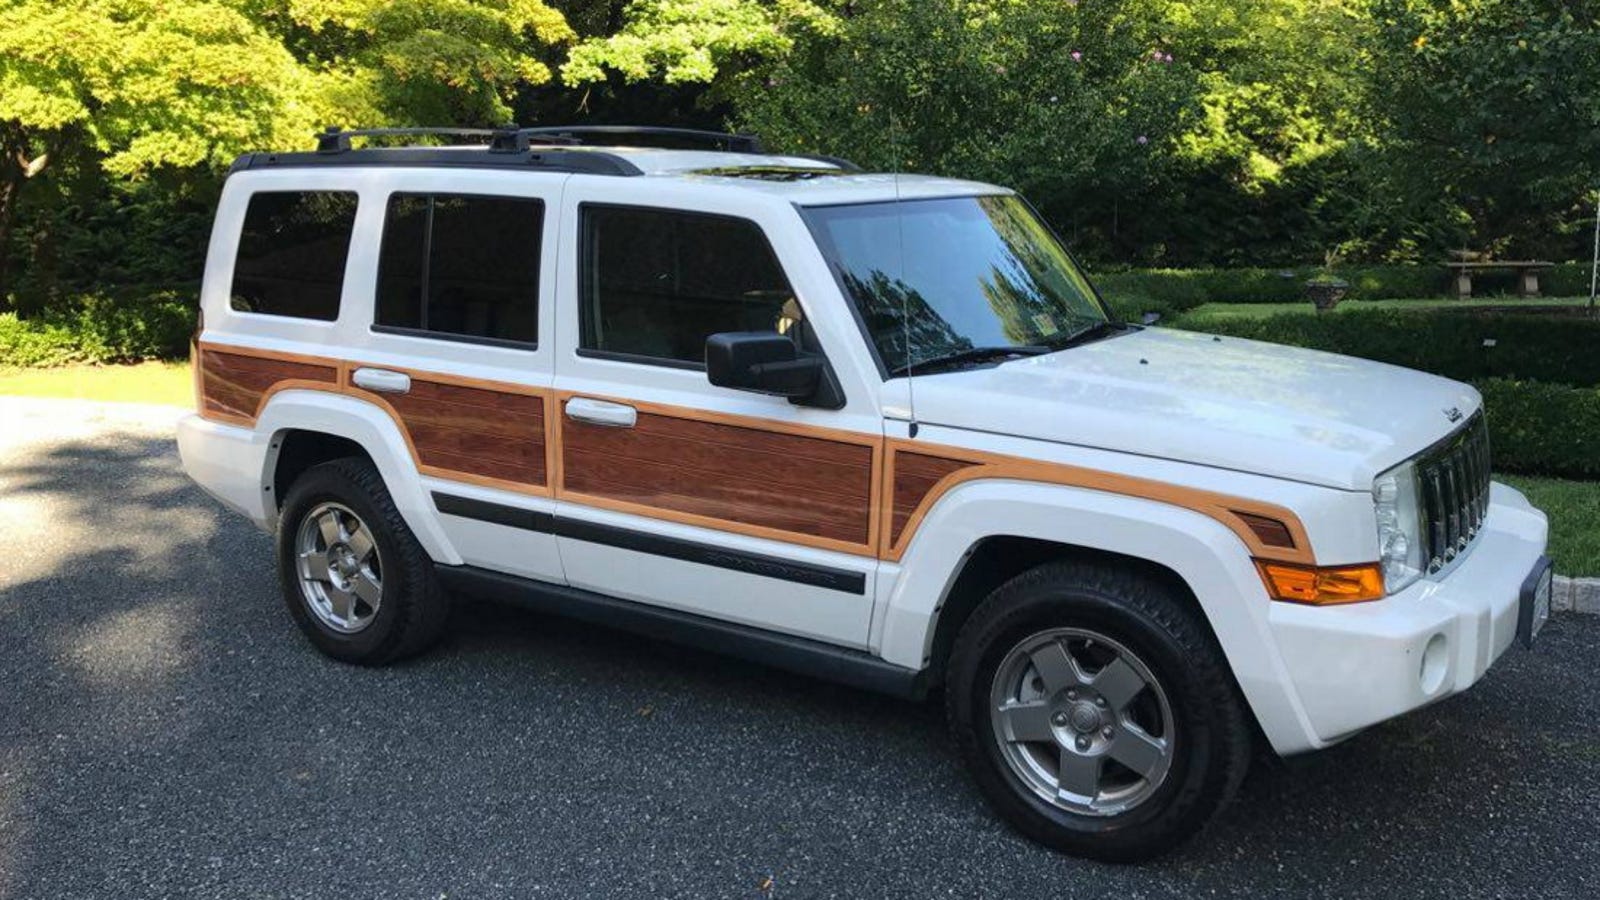 At 9,995, Does This 2007 Jeep Commander Give You Wood?